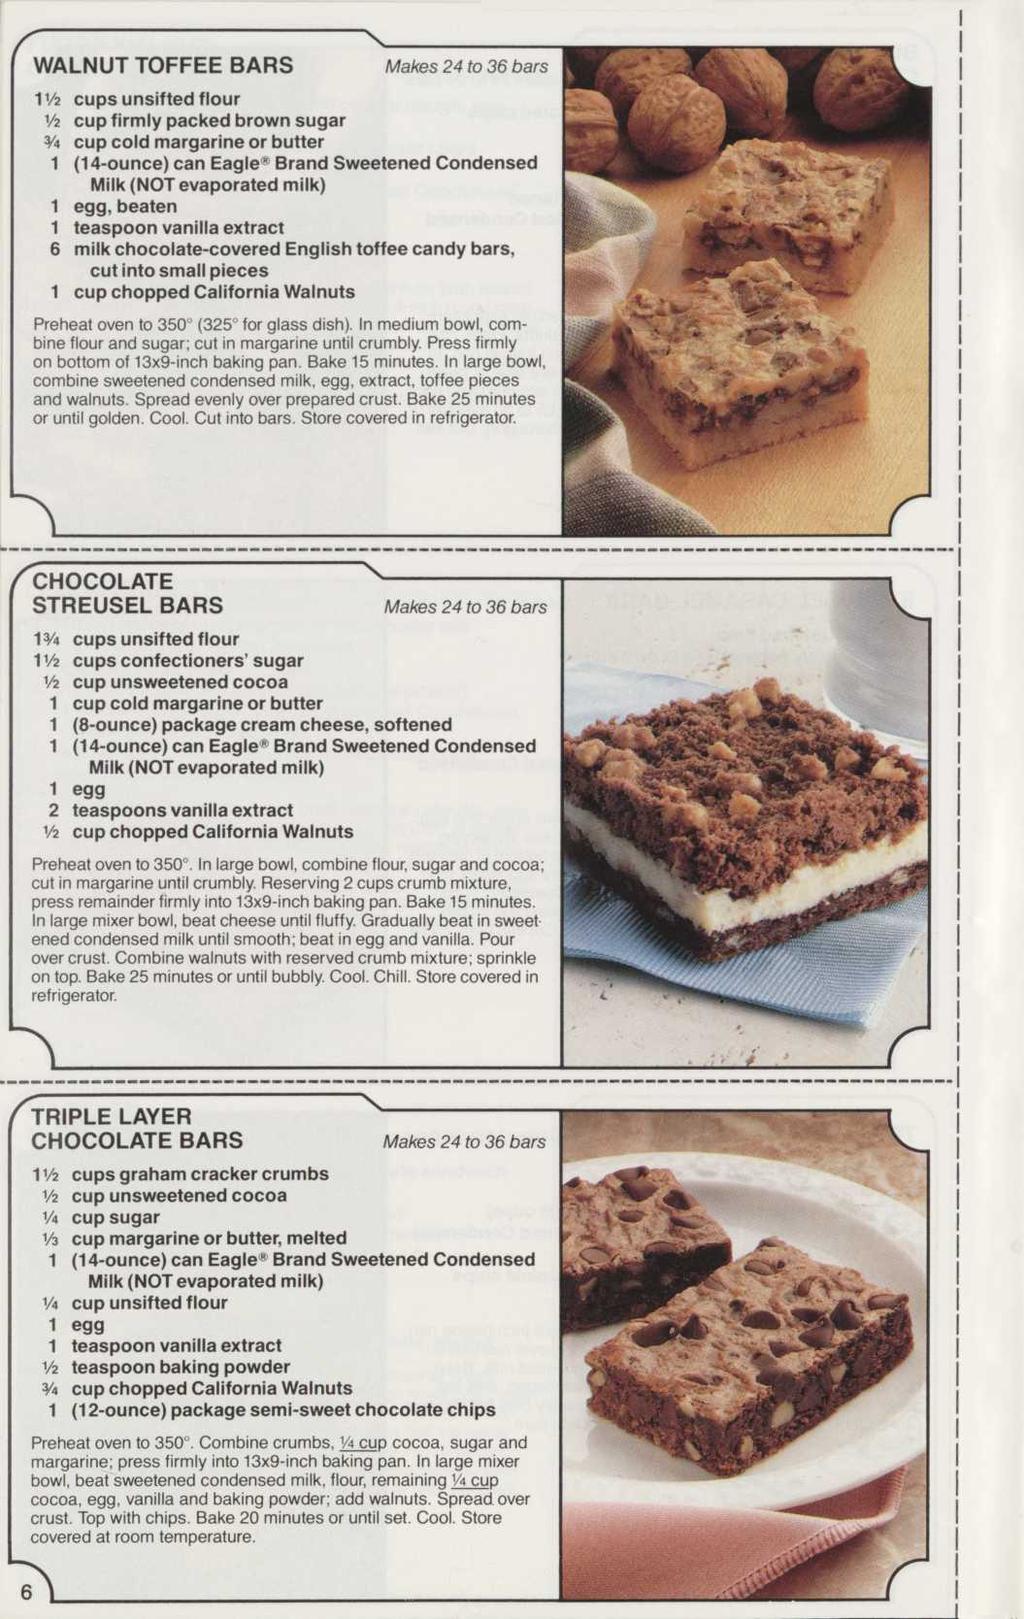 WALNUT TOFFEE BARS IV2 cups unsifted flour V2 cup firmly packed brown sugar % cup cold margarine or butter (4-ounce) can Eagle R Brand Sweetened Condensed egg, beaten teaspoon vanilla extract 6 milk